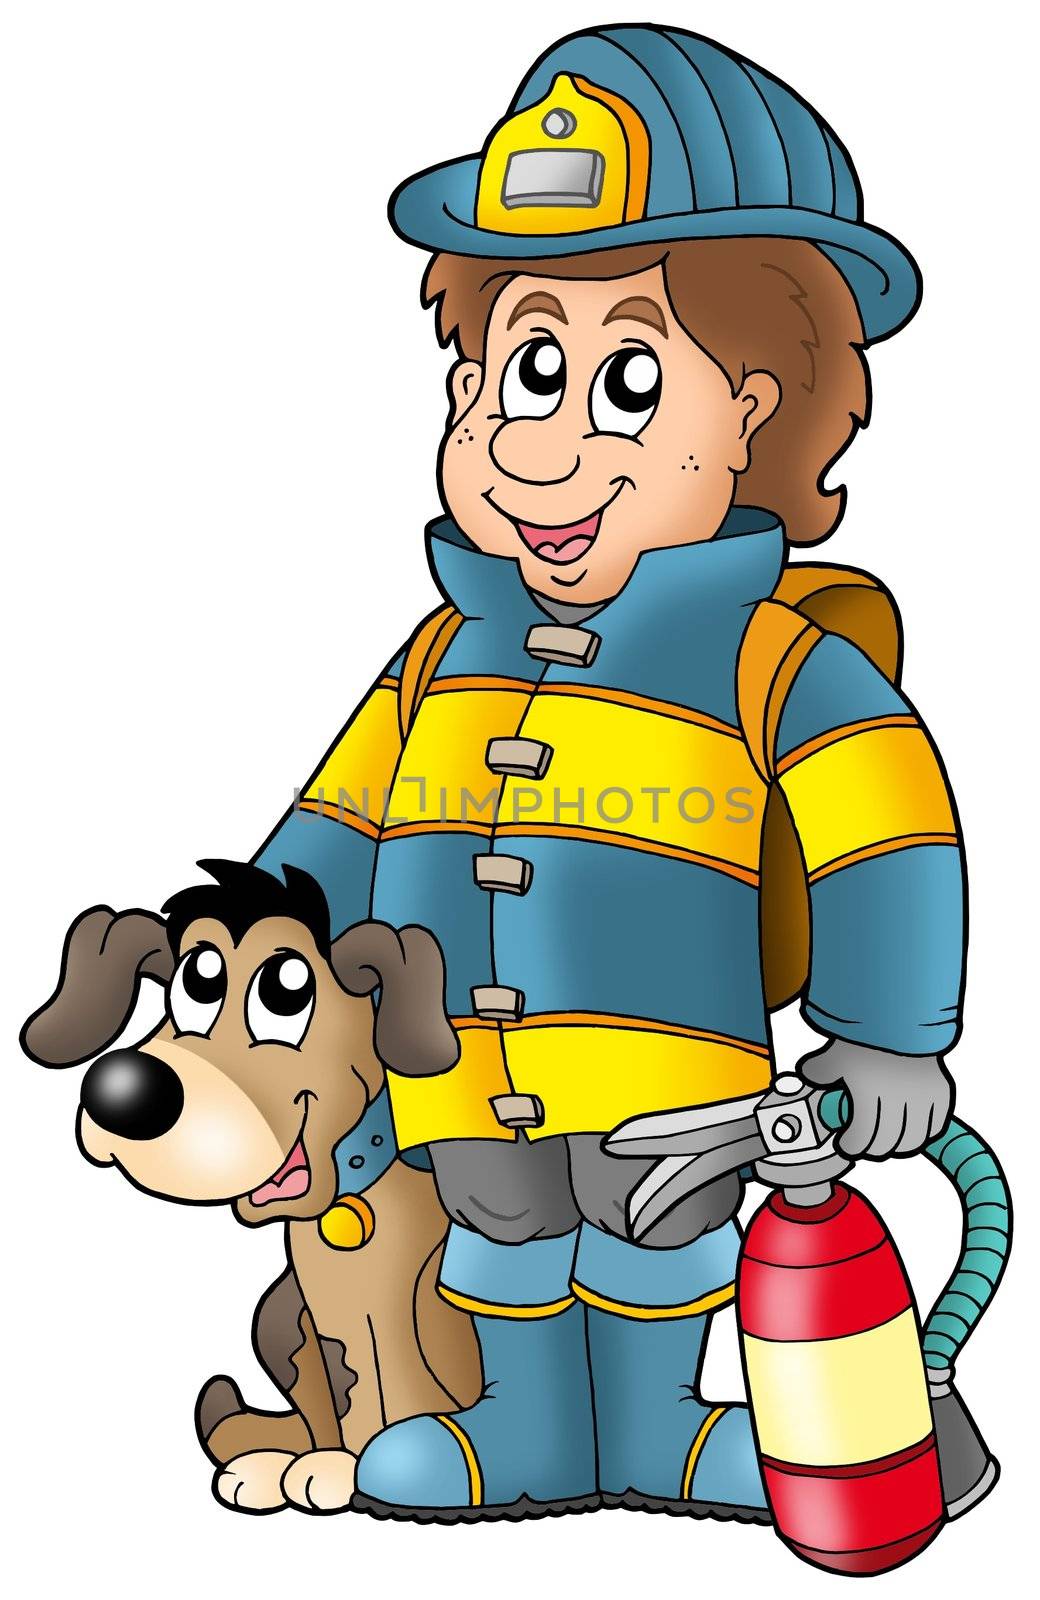 Firefighter with dog and extinguisher by clairev